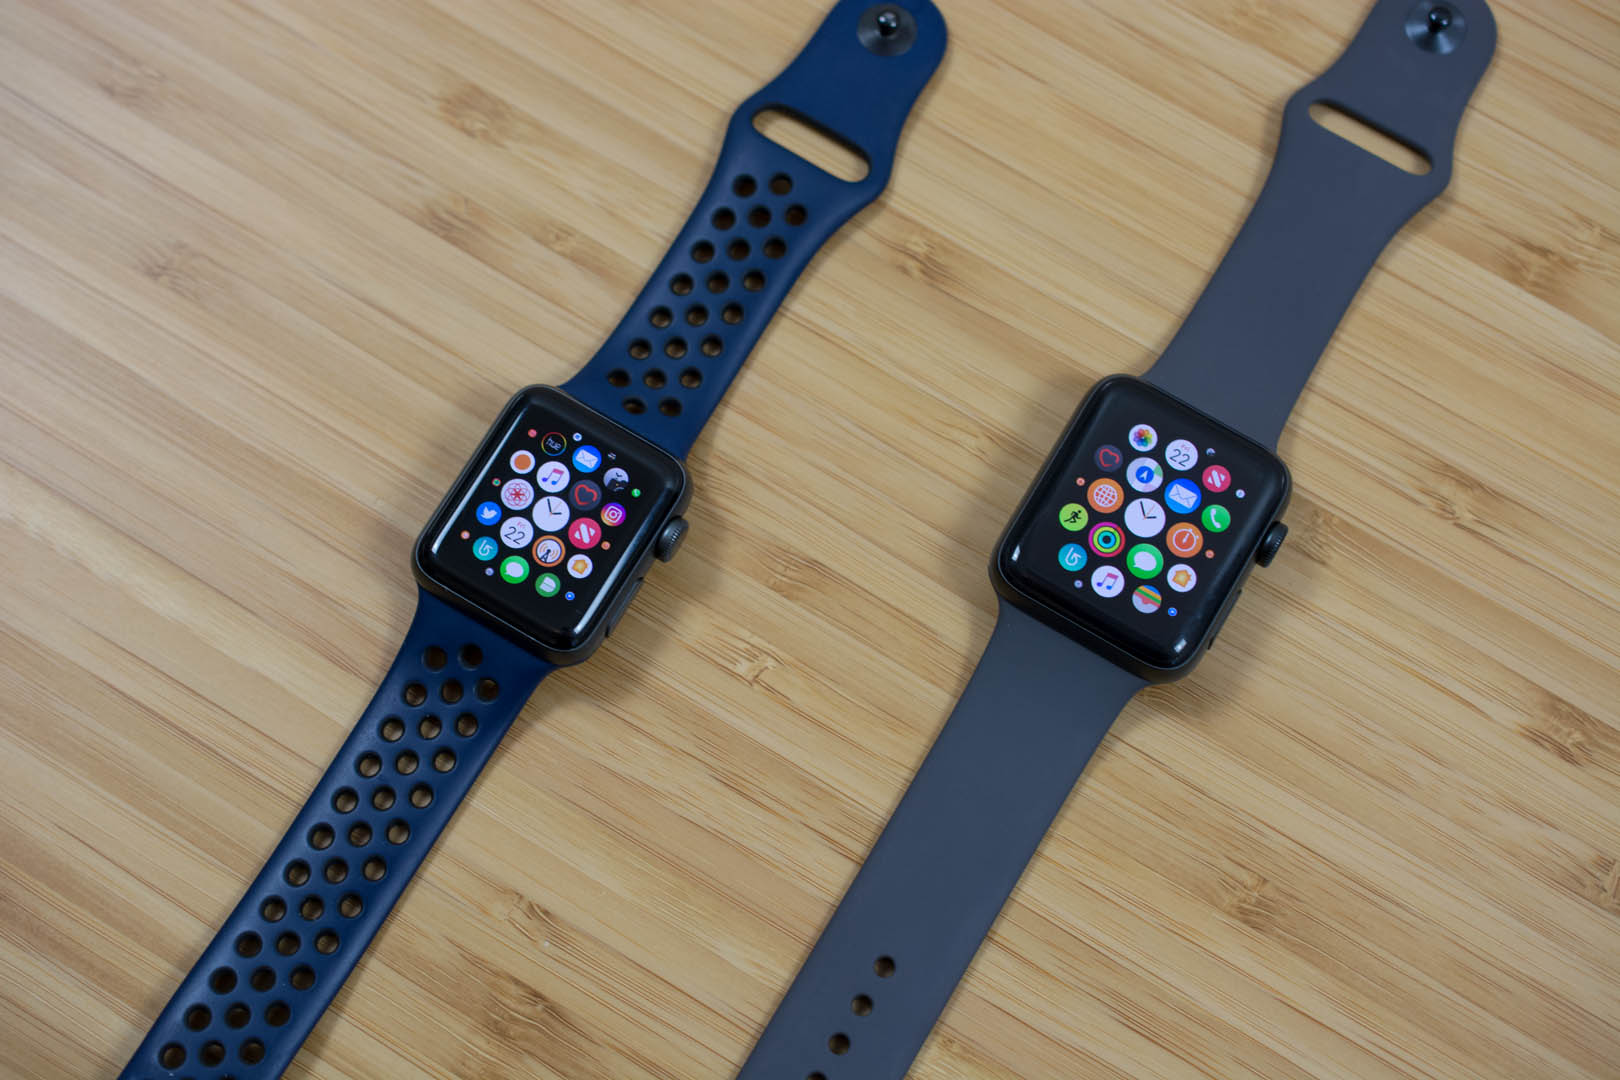 Apple Pay Cash hits Apple Watches with watchOS 4.2 release | Ars Technica